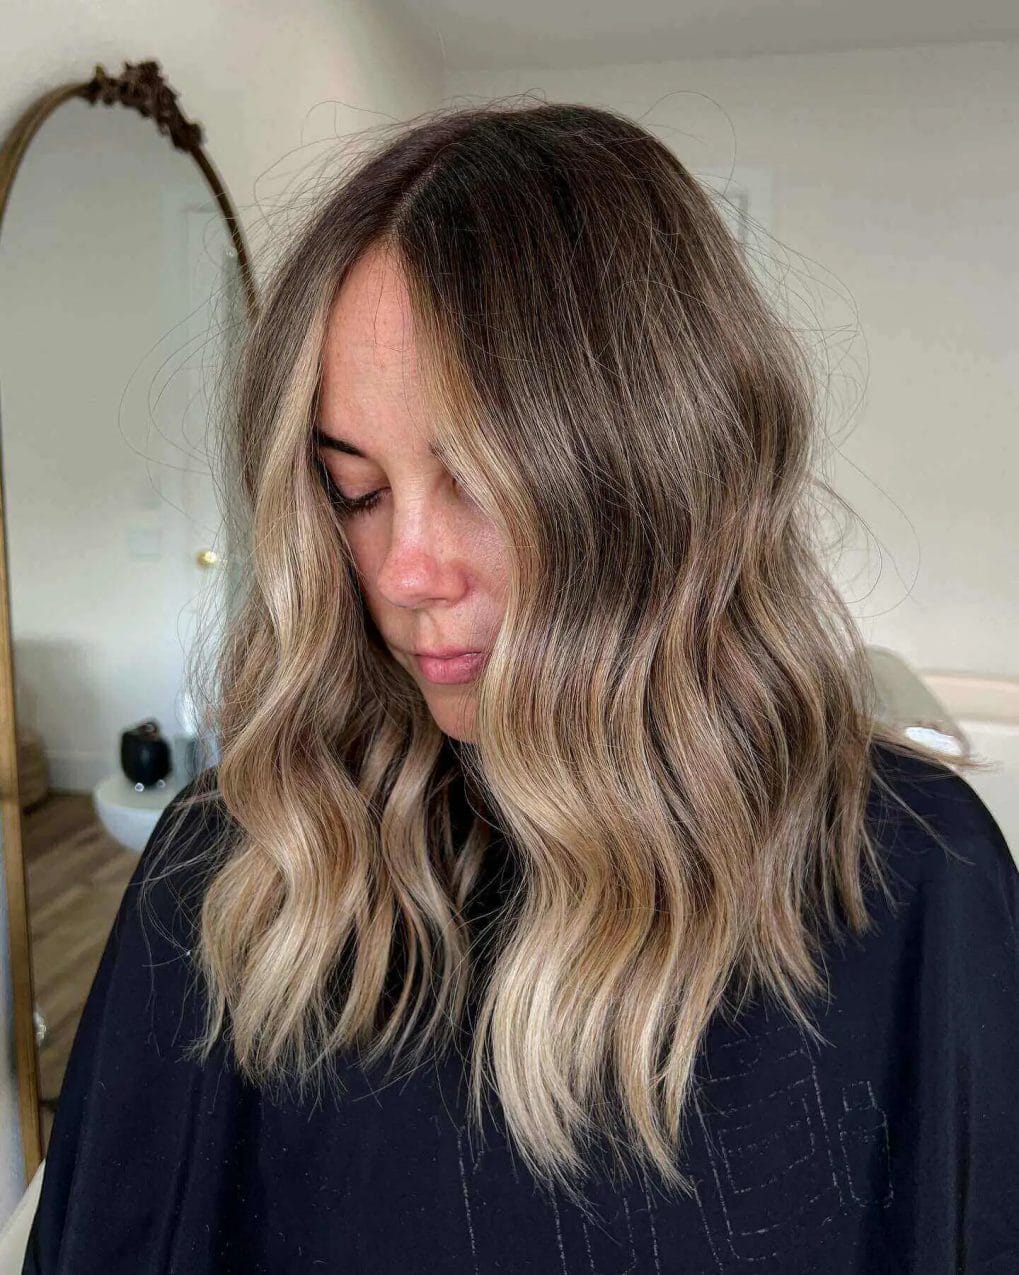 Shoulder-length cut with sun-kissed and blended highlights